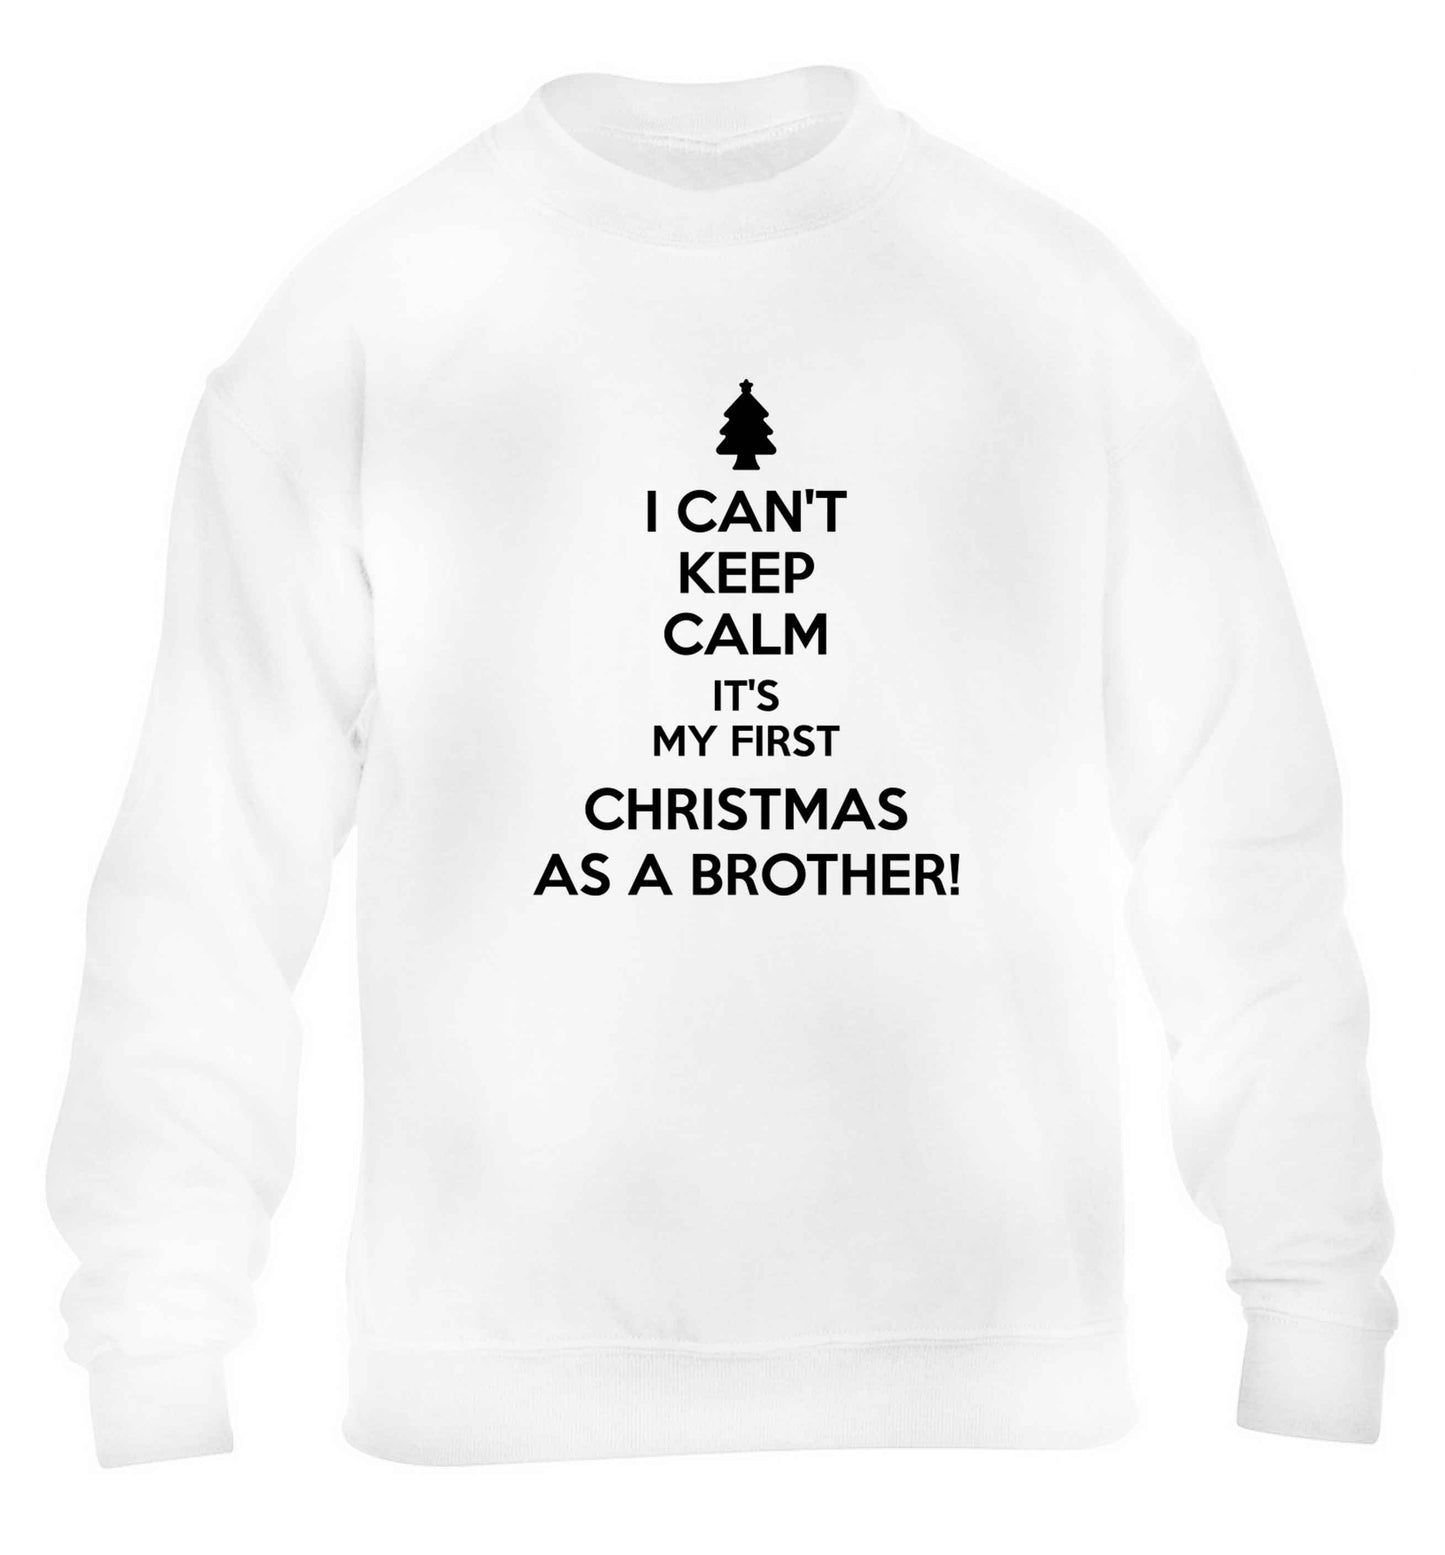 I can't keep calm it's my first Christmas as a brother! children's white sweater 12-13 Years